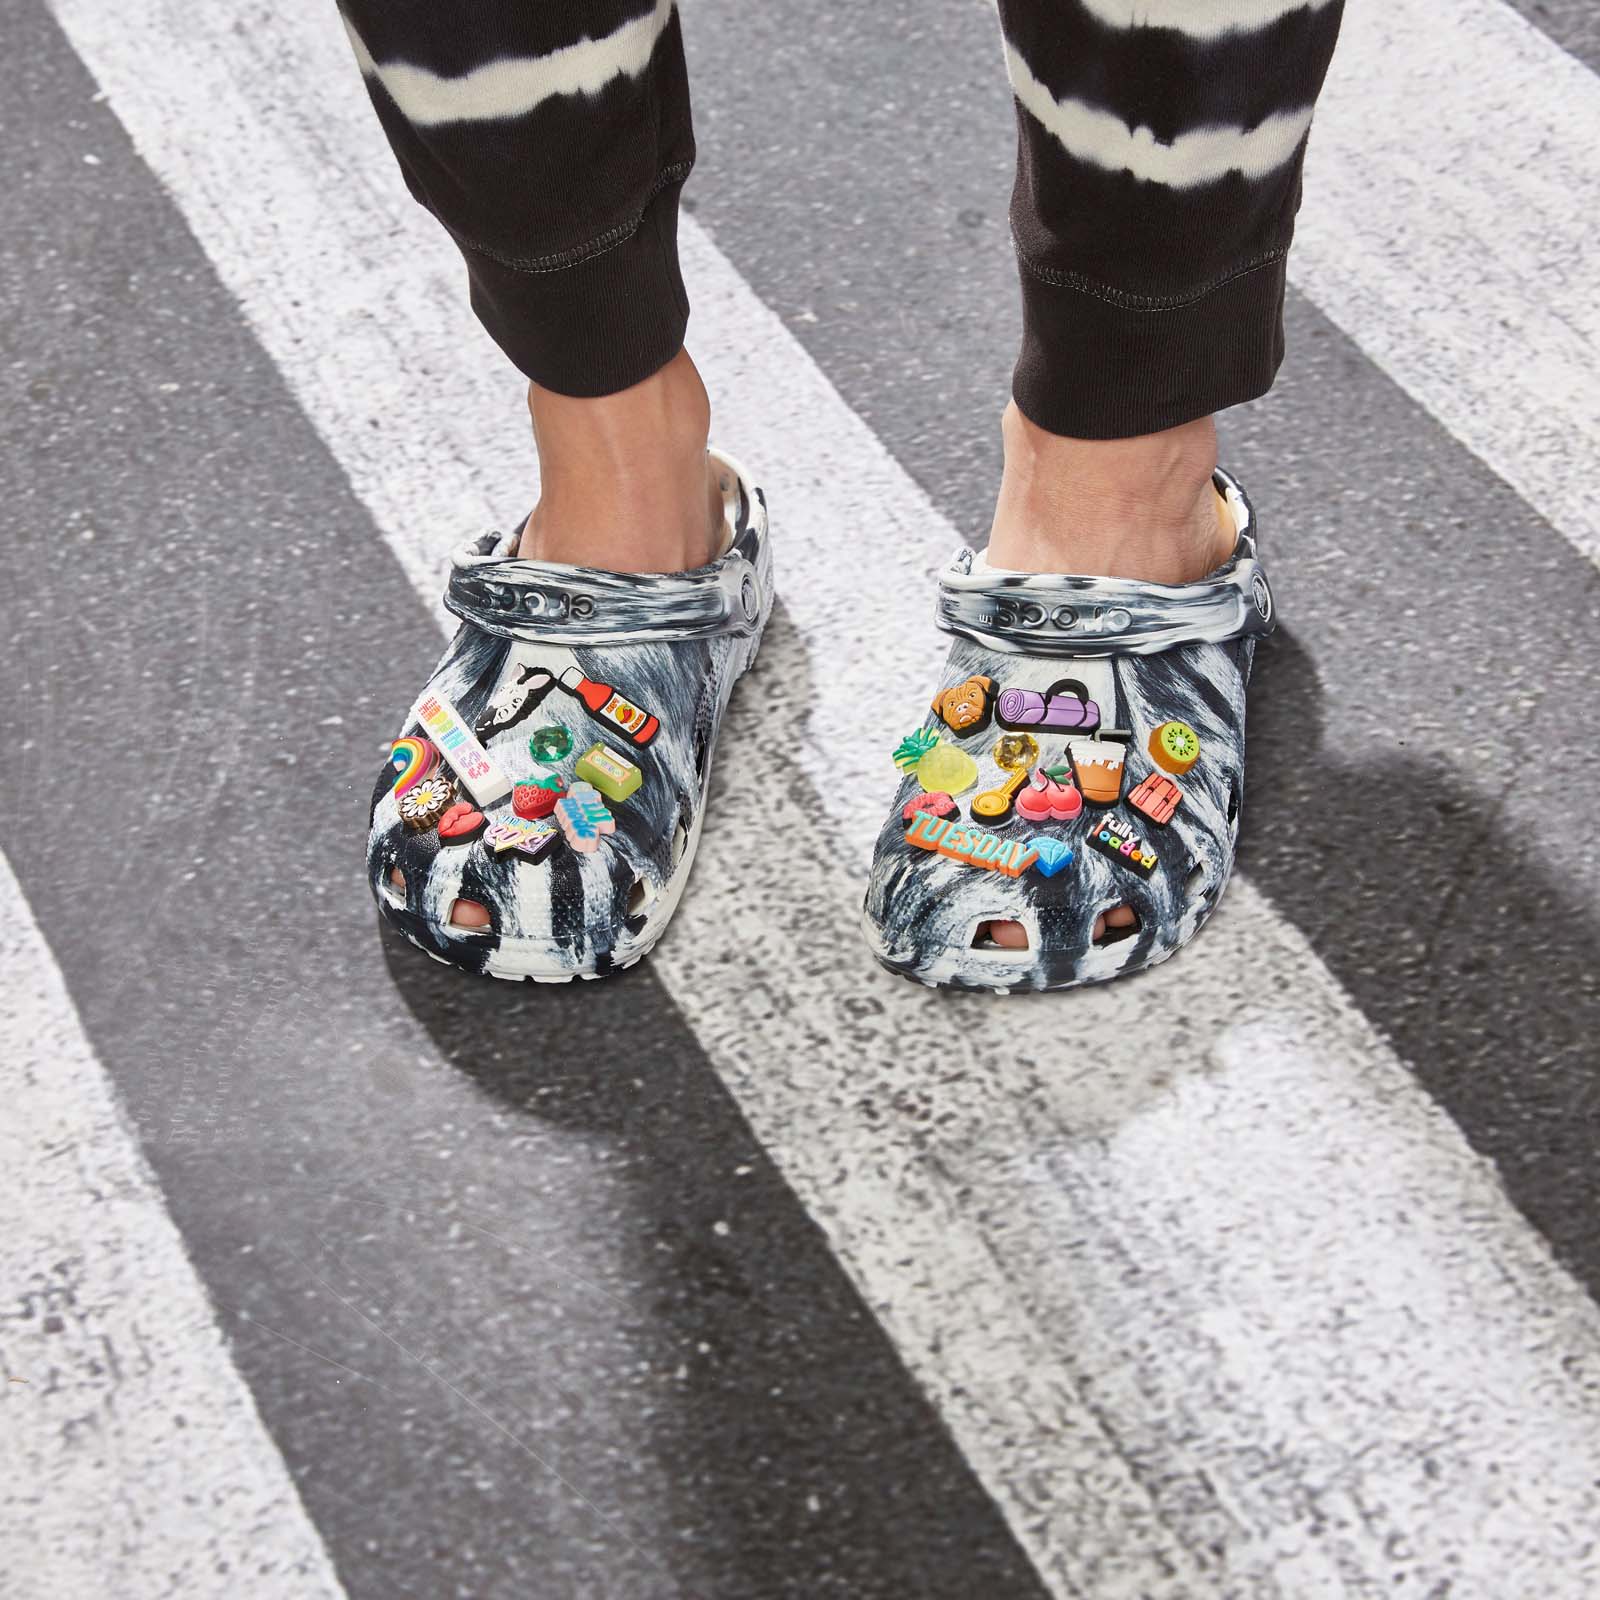 Why Crocs is obsessed with collabs | Courier - Mailchimp